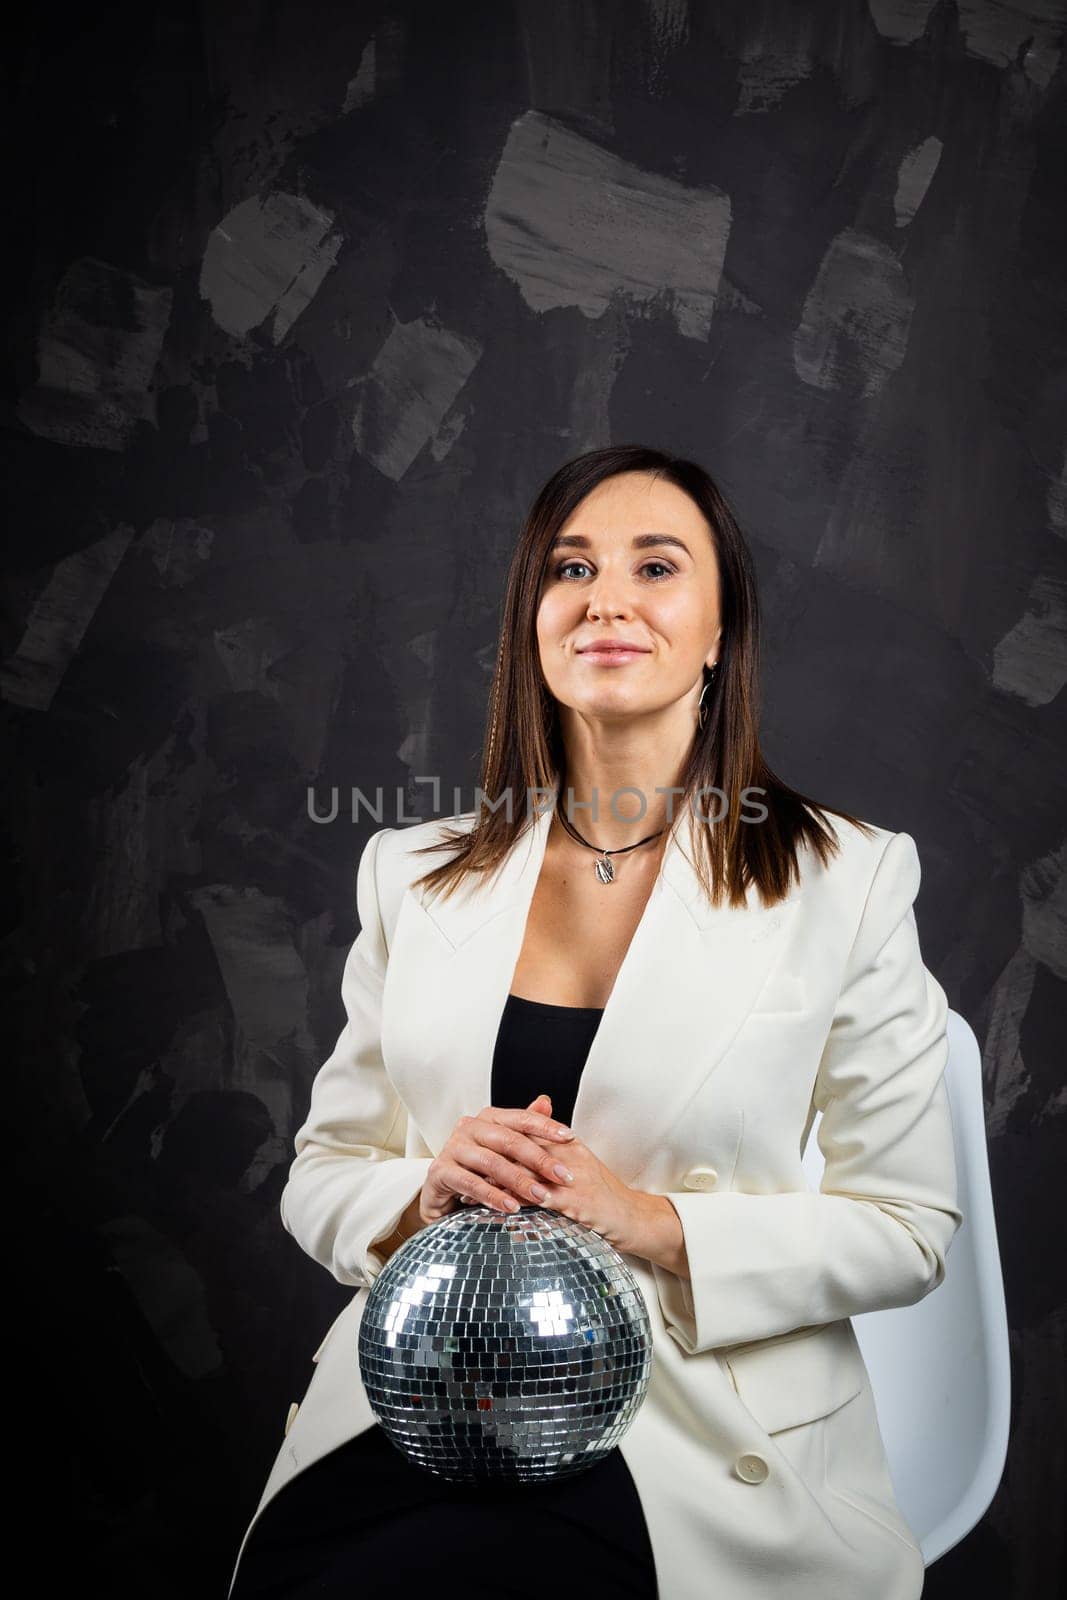 Portrait of a woman holding a silver disco ball. Taken in a photo studio. by Evgenii_Leontev